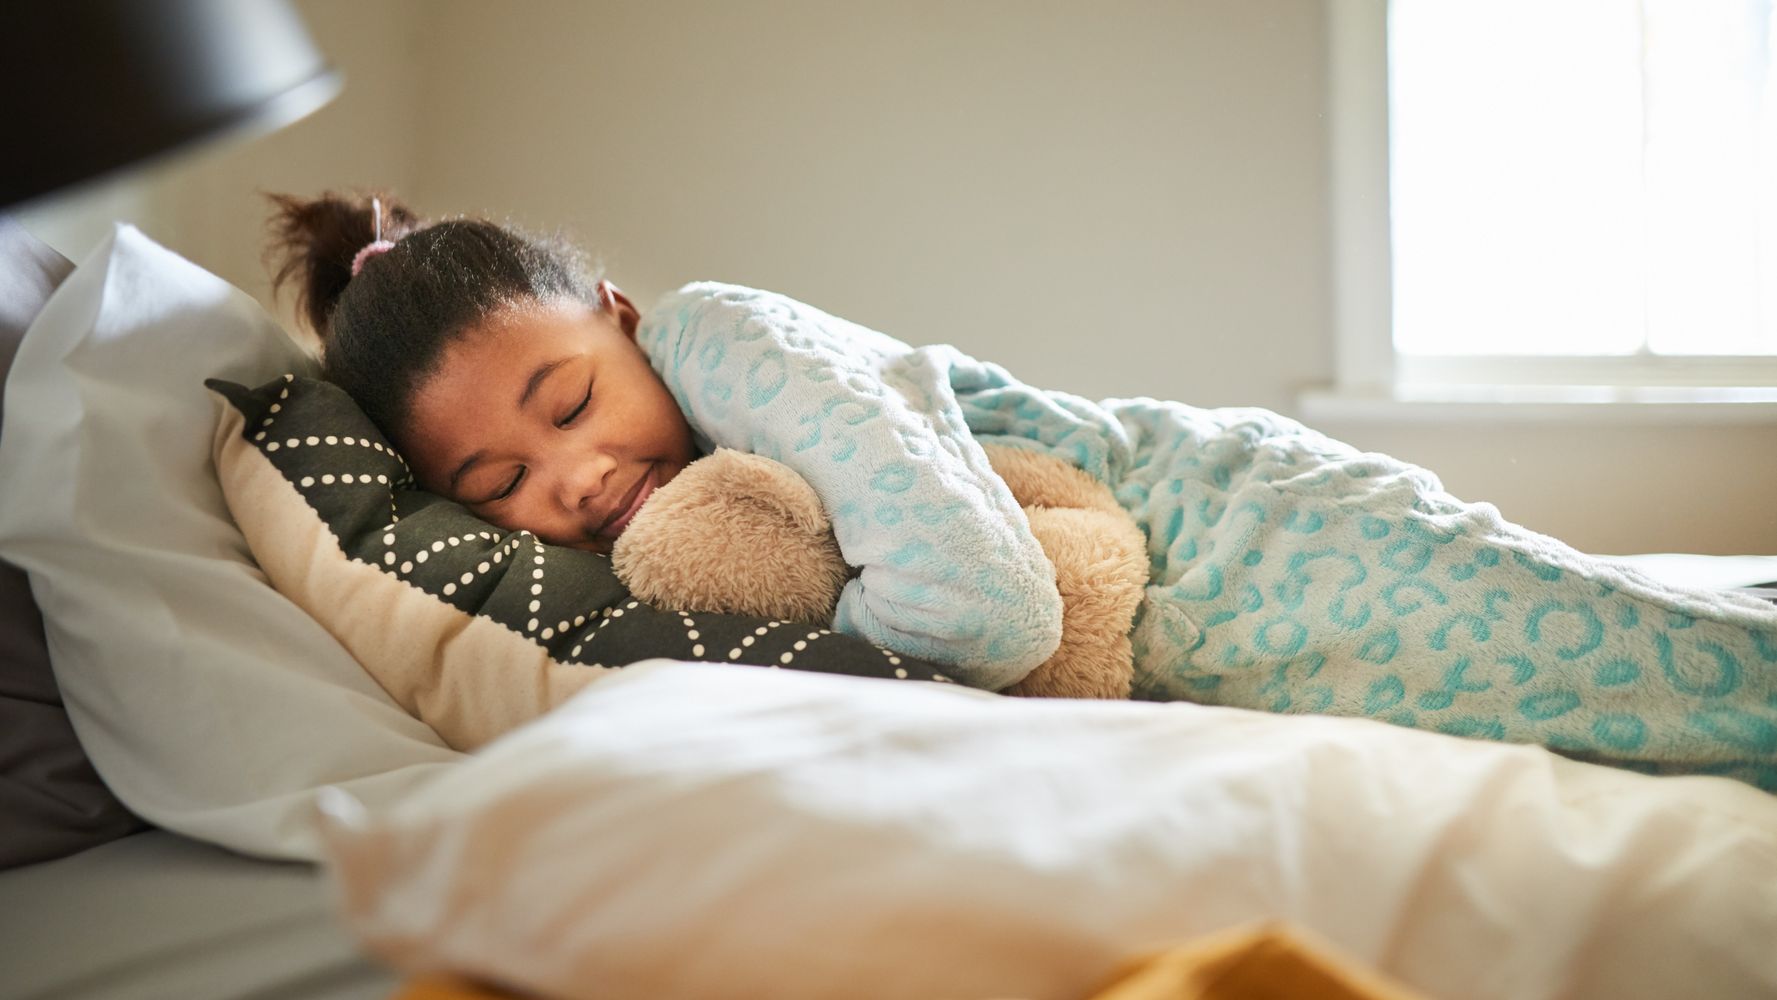 A new study suggests that parents should take their children’s snoring seriously